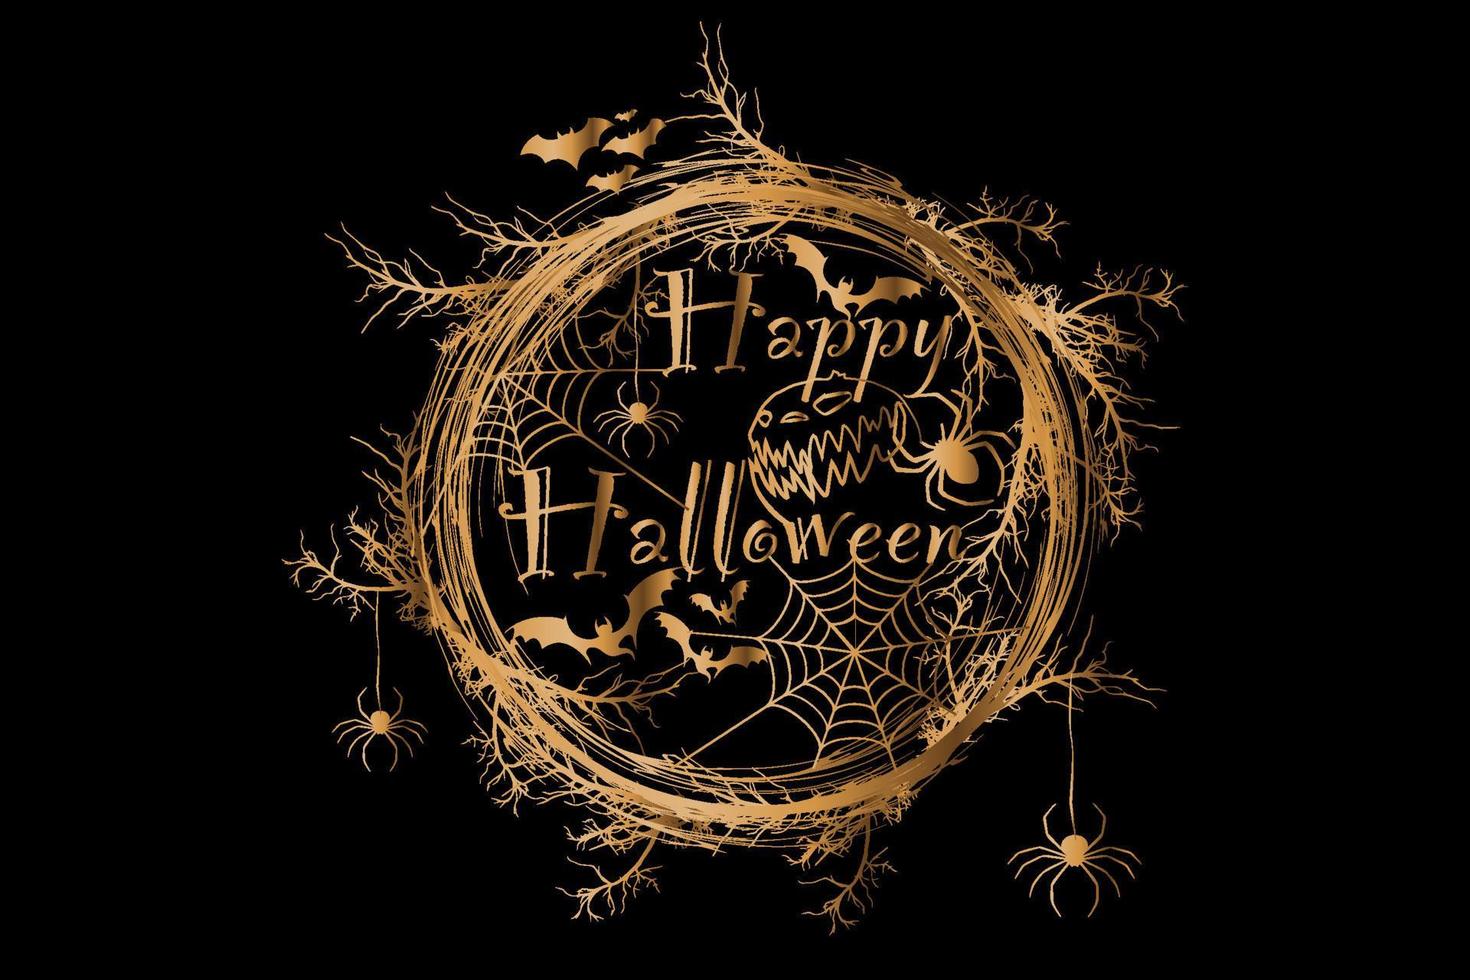 Happy Halloween Text Banner, gold horror wreath of branches, a realistic round frame border of twisted branches, golden vector illustration isolated on black background